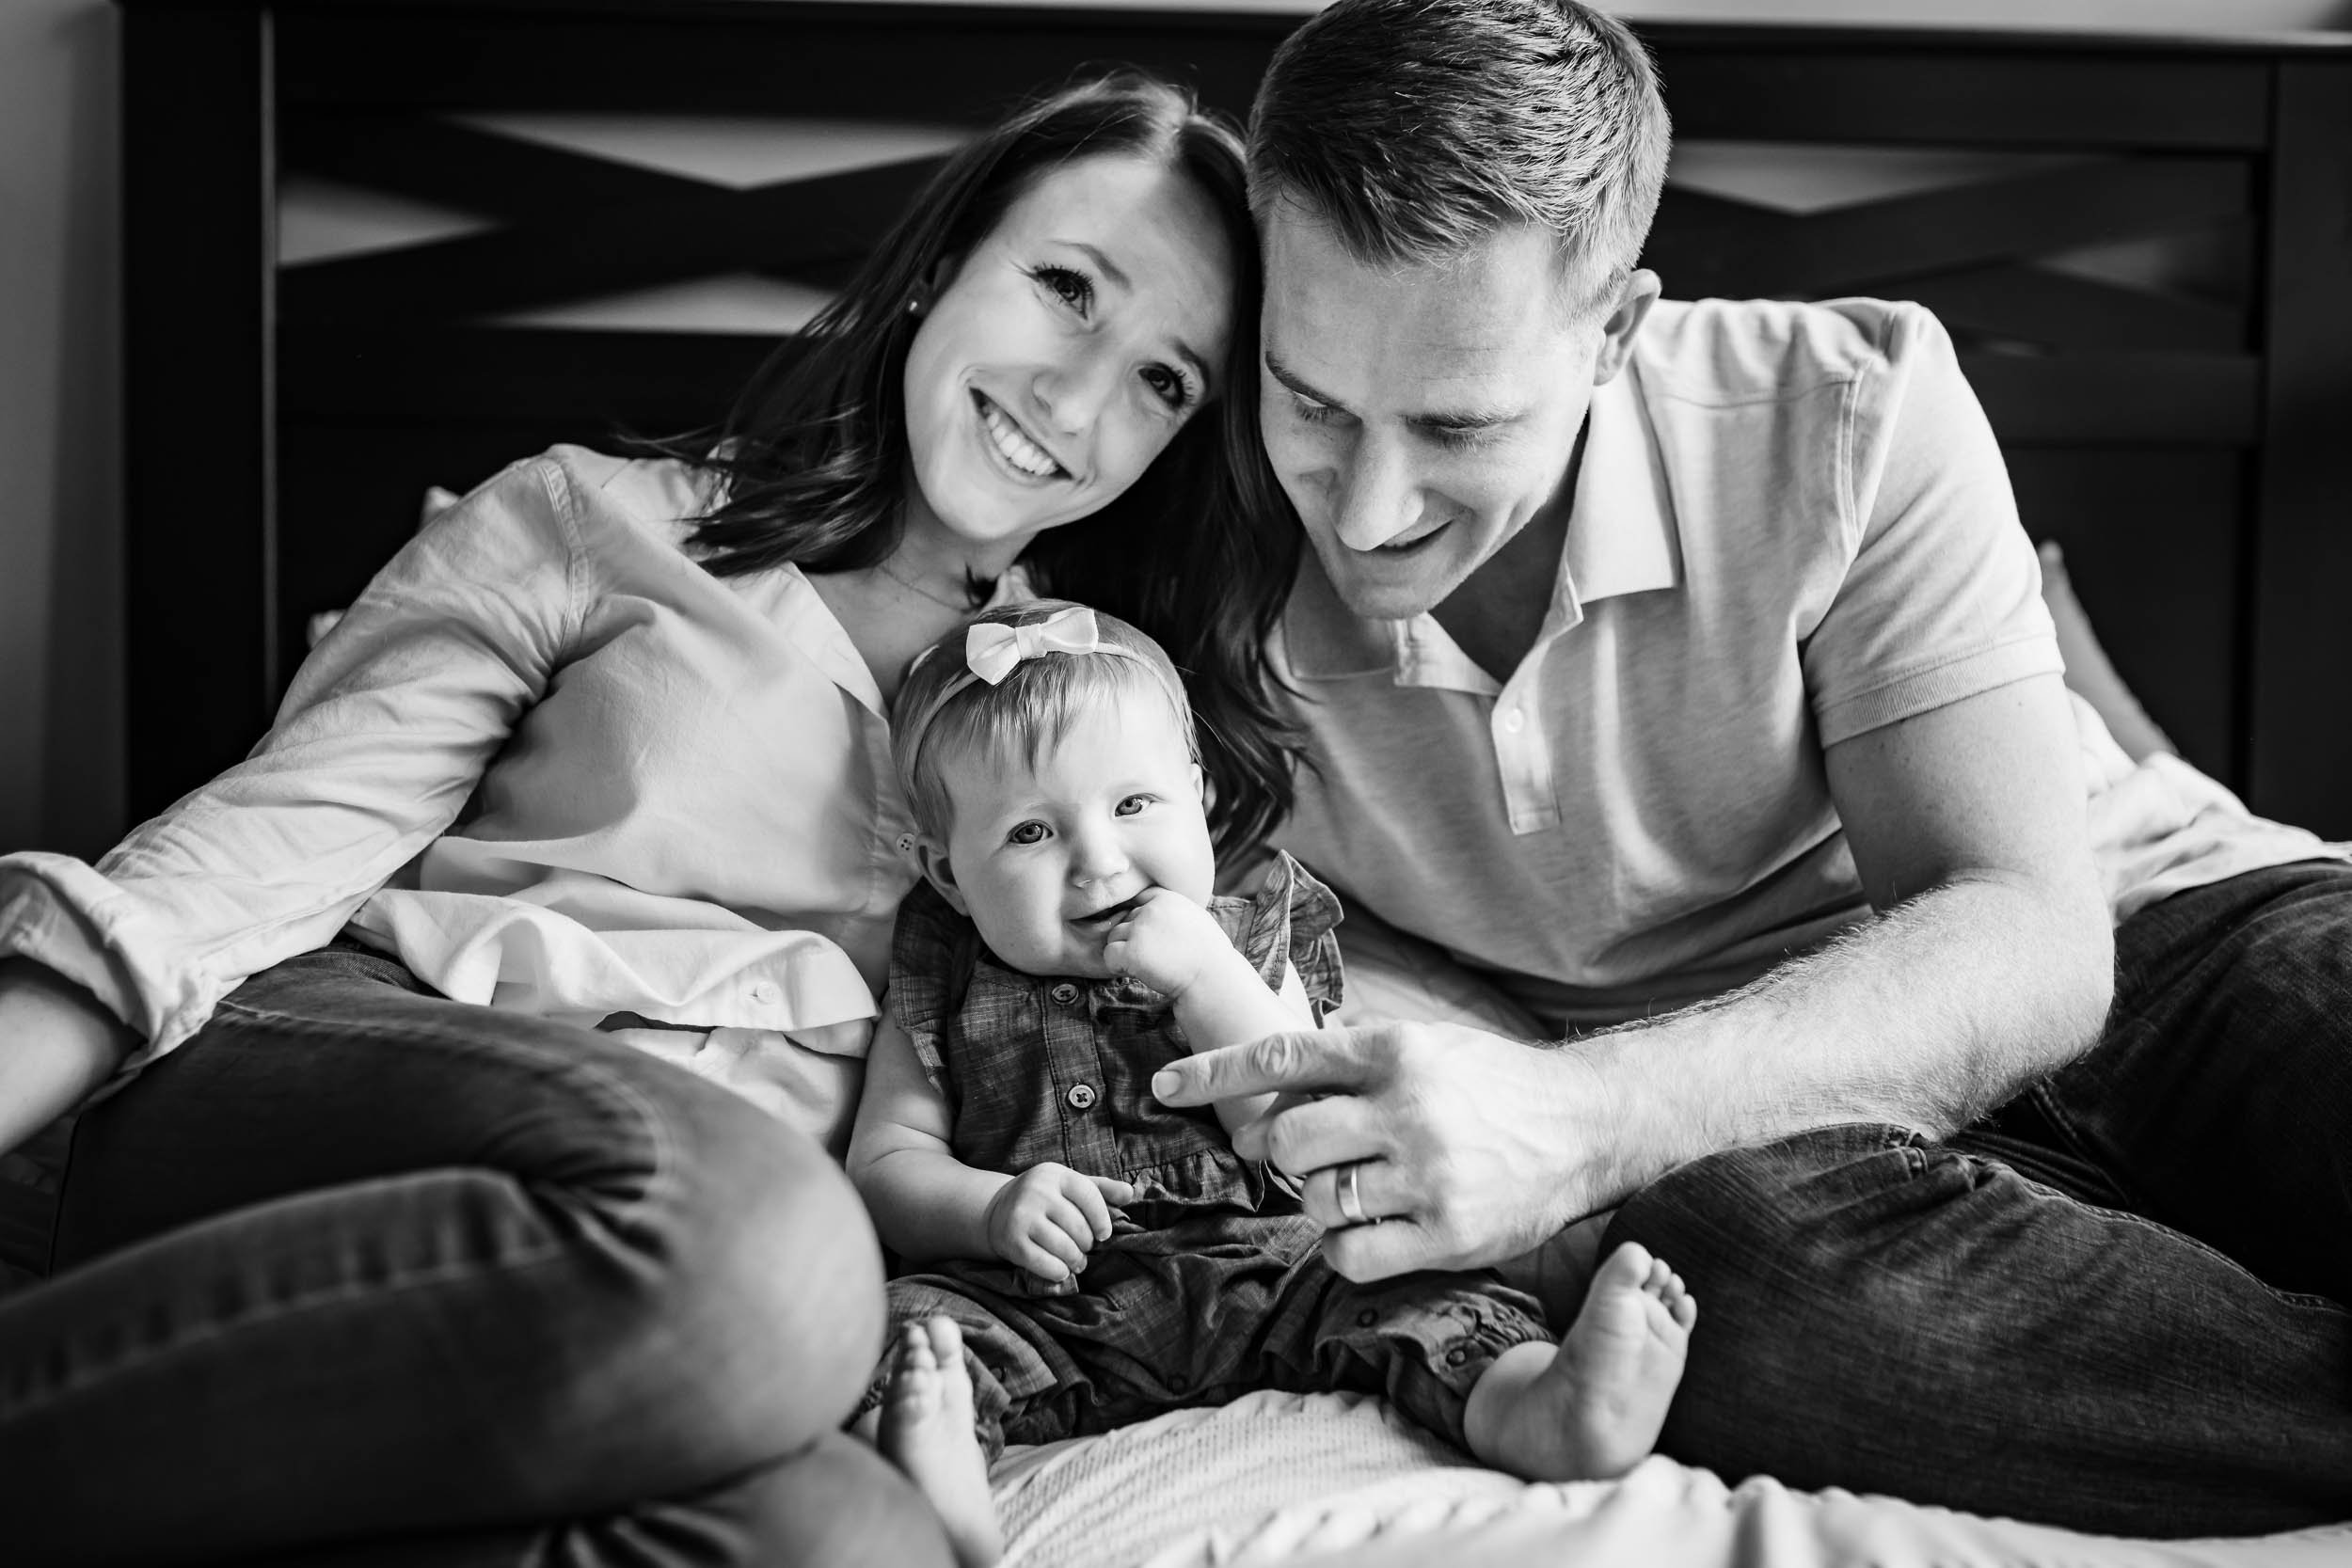 Streeterville | Black and White Family Portrait | Chicago Il